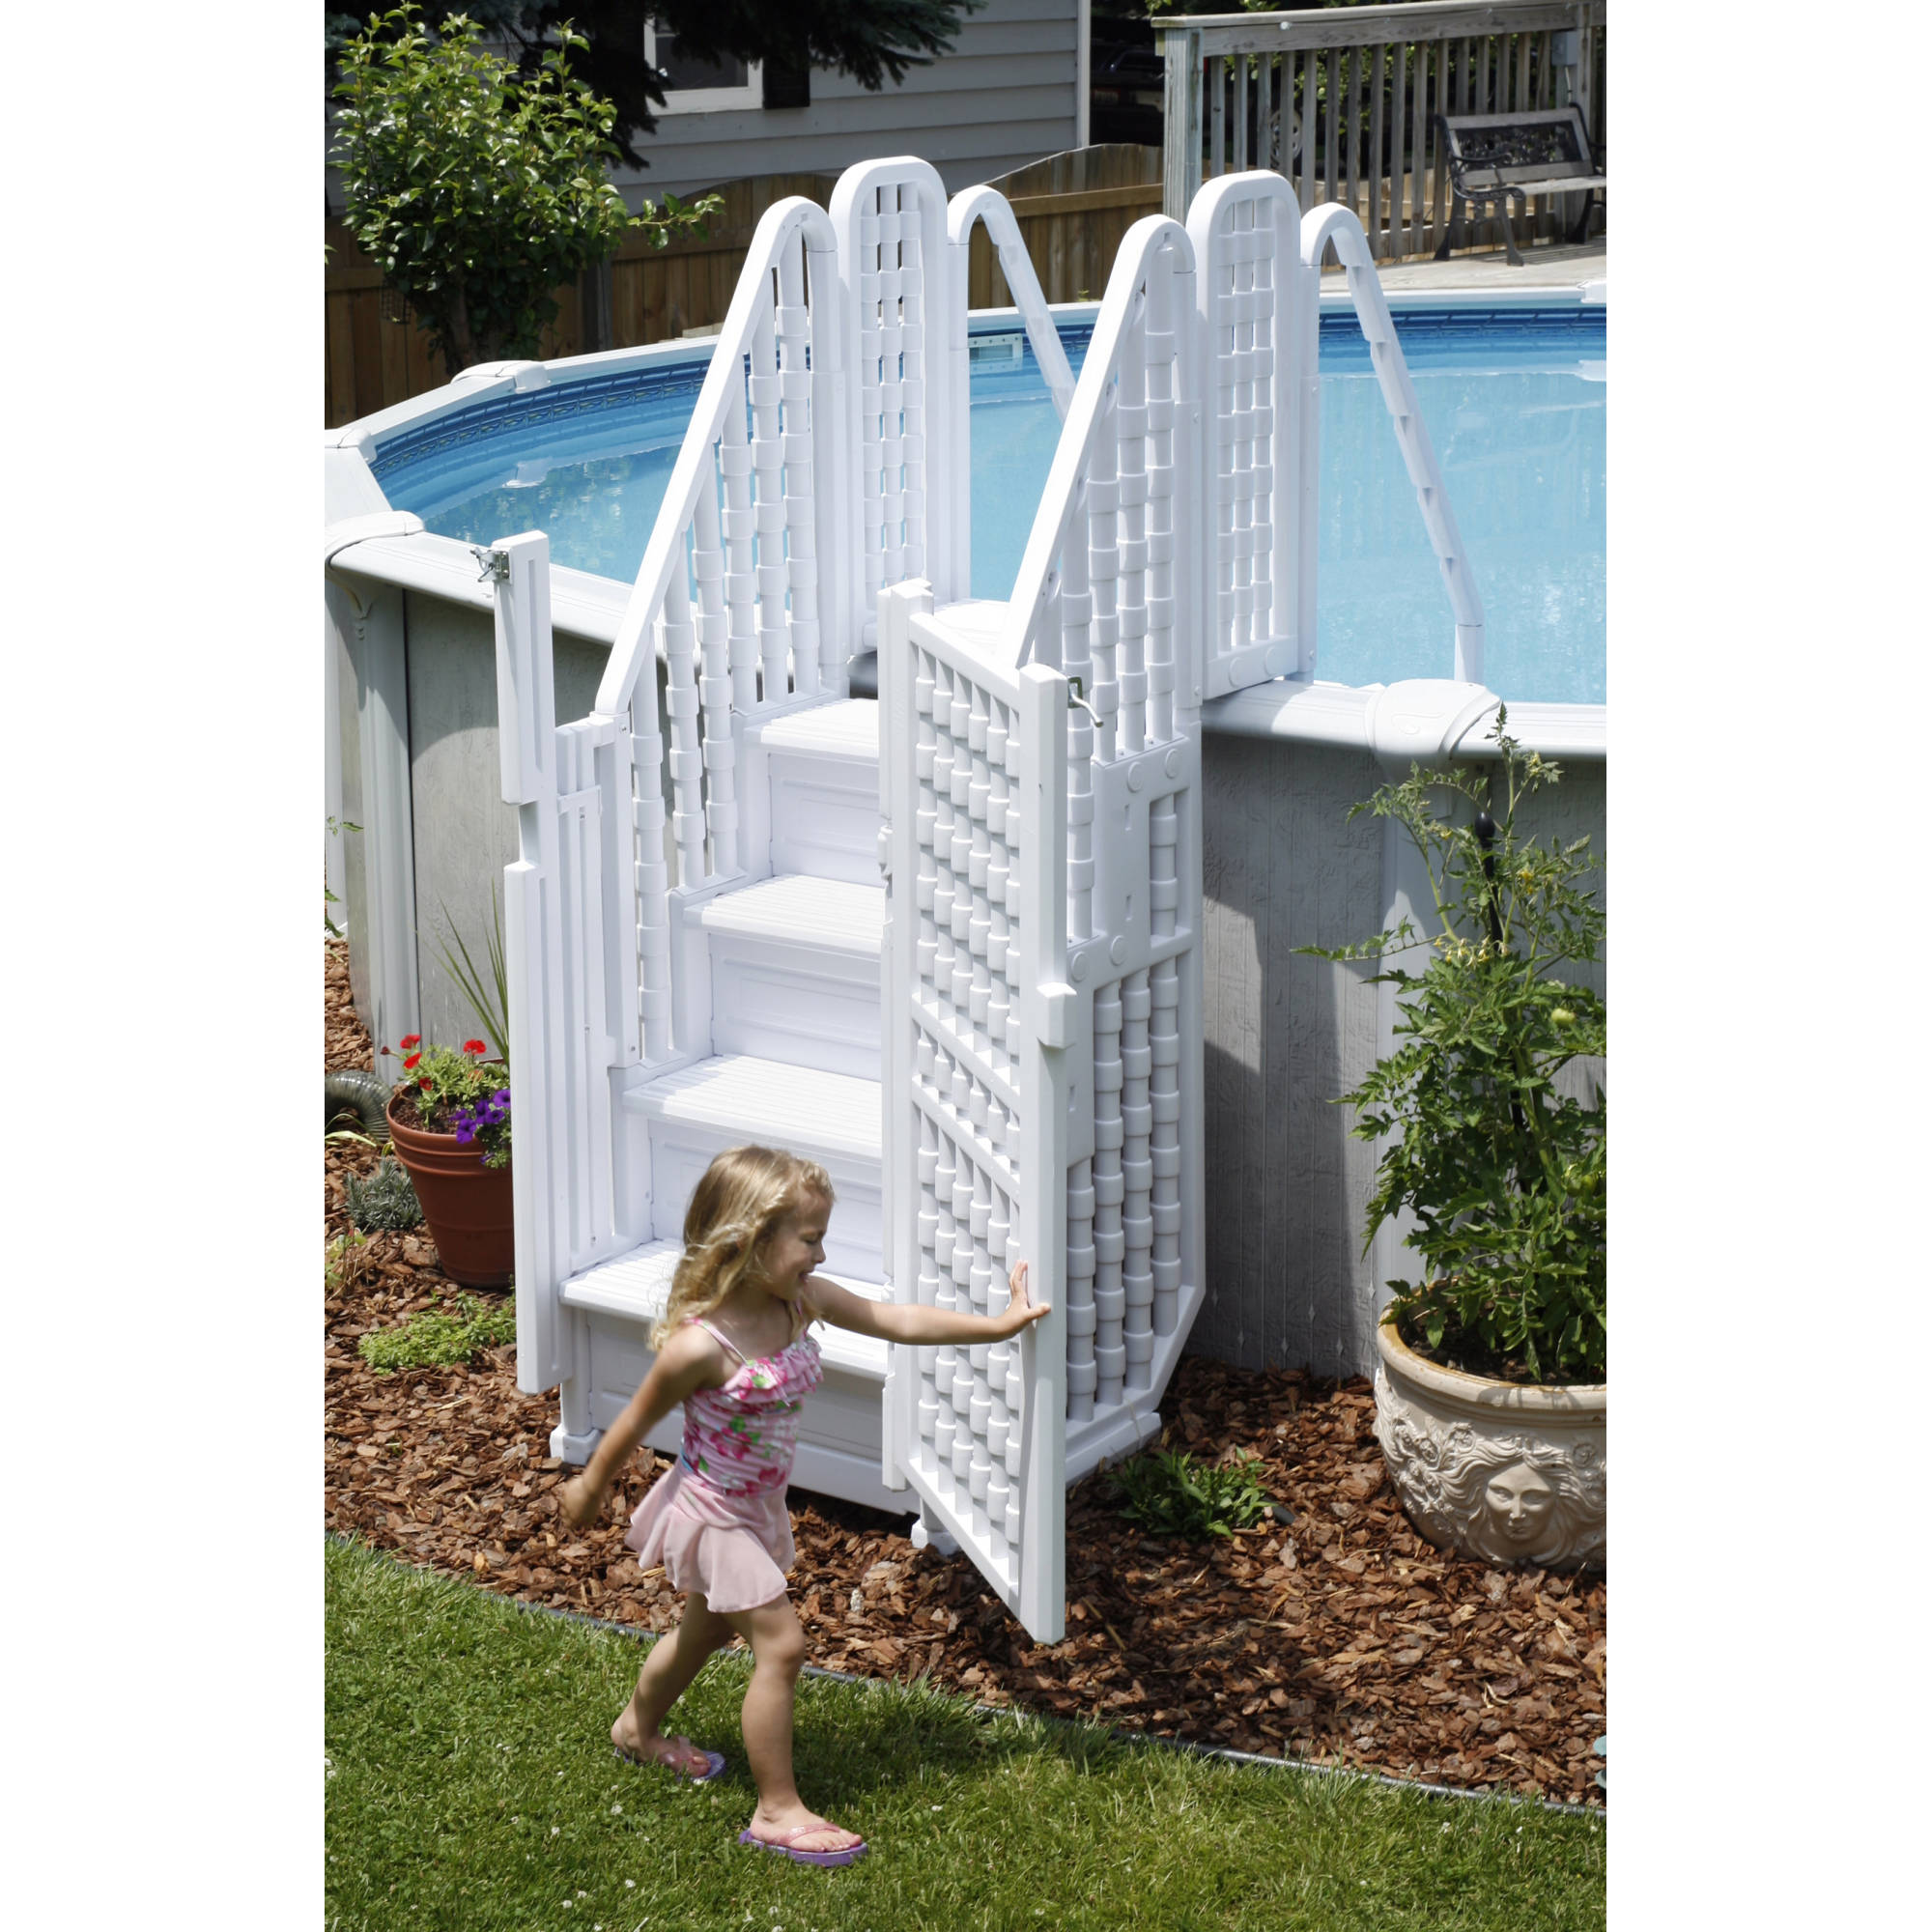 Blue Wave Easy Pool Step Entry System w/ Gate